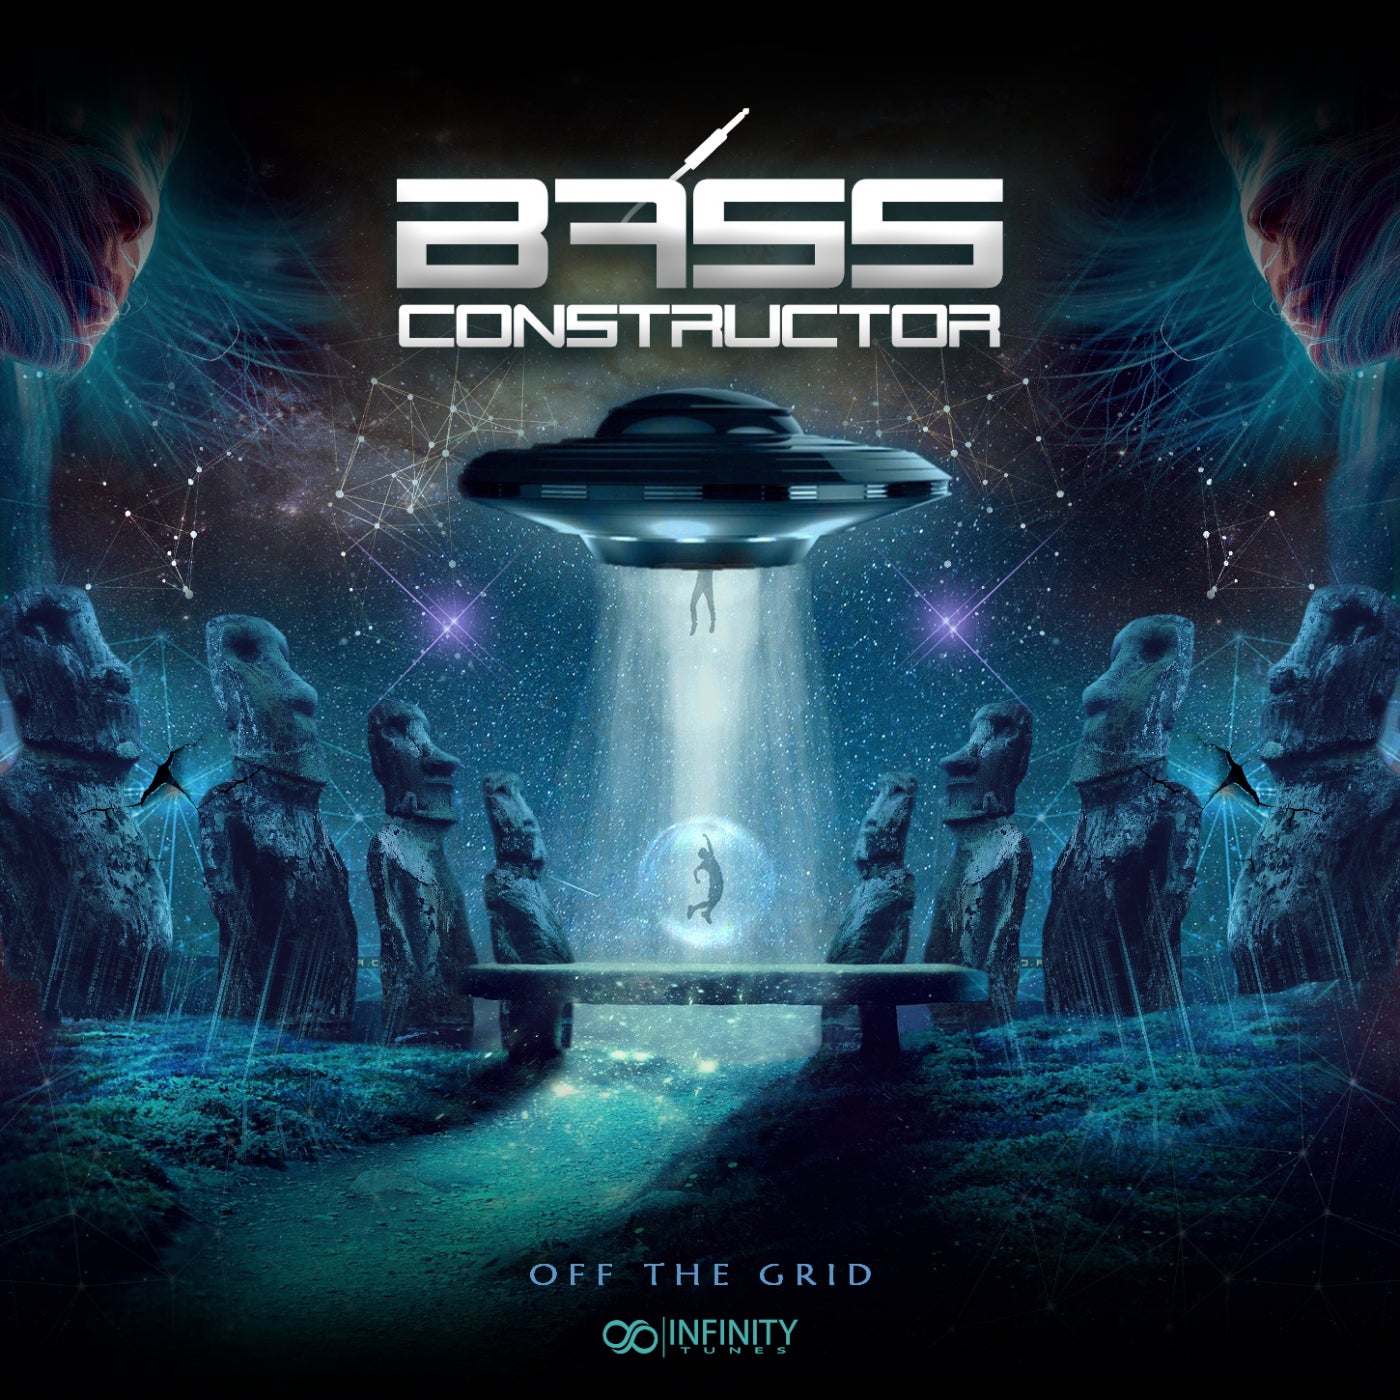 Off the Grid. Infinity Grid. Bass Construction – the e.p..